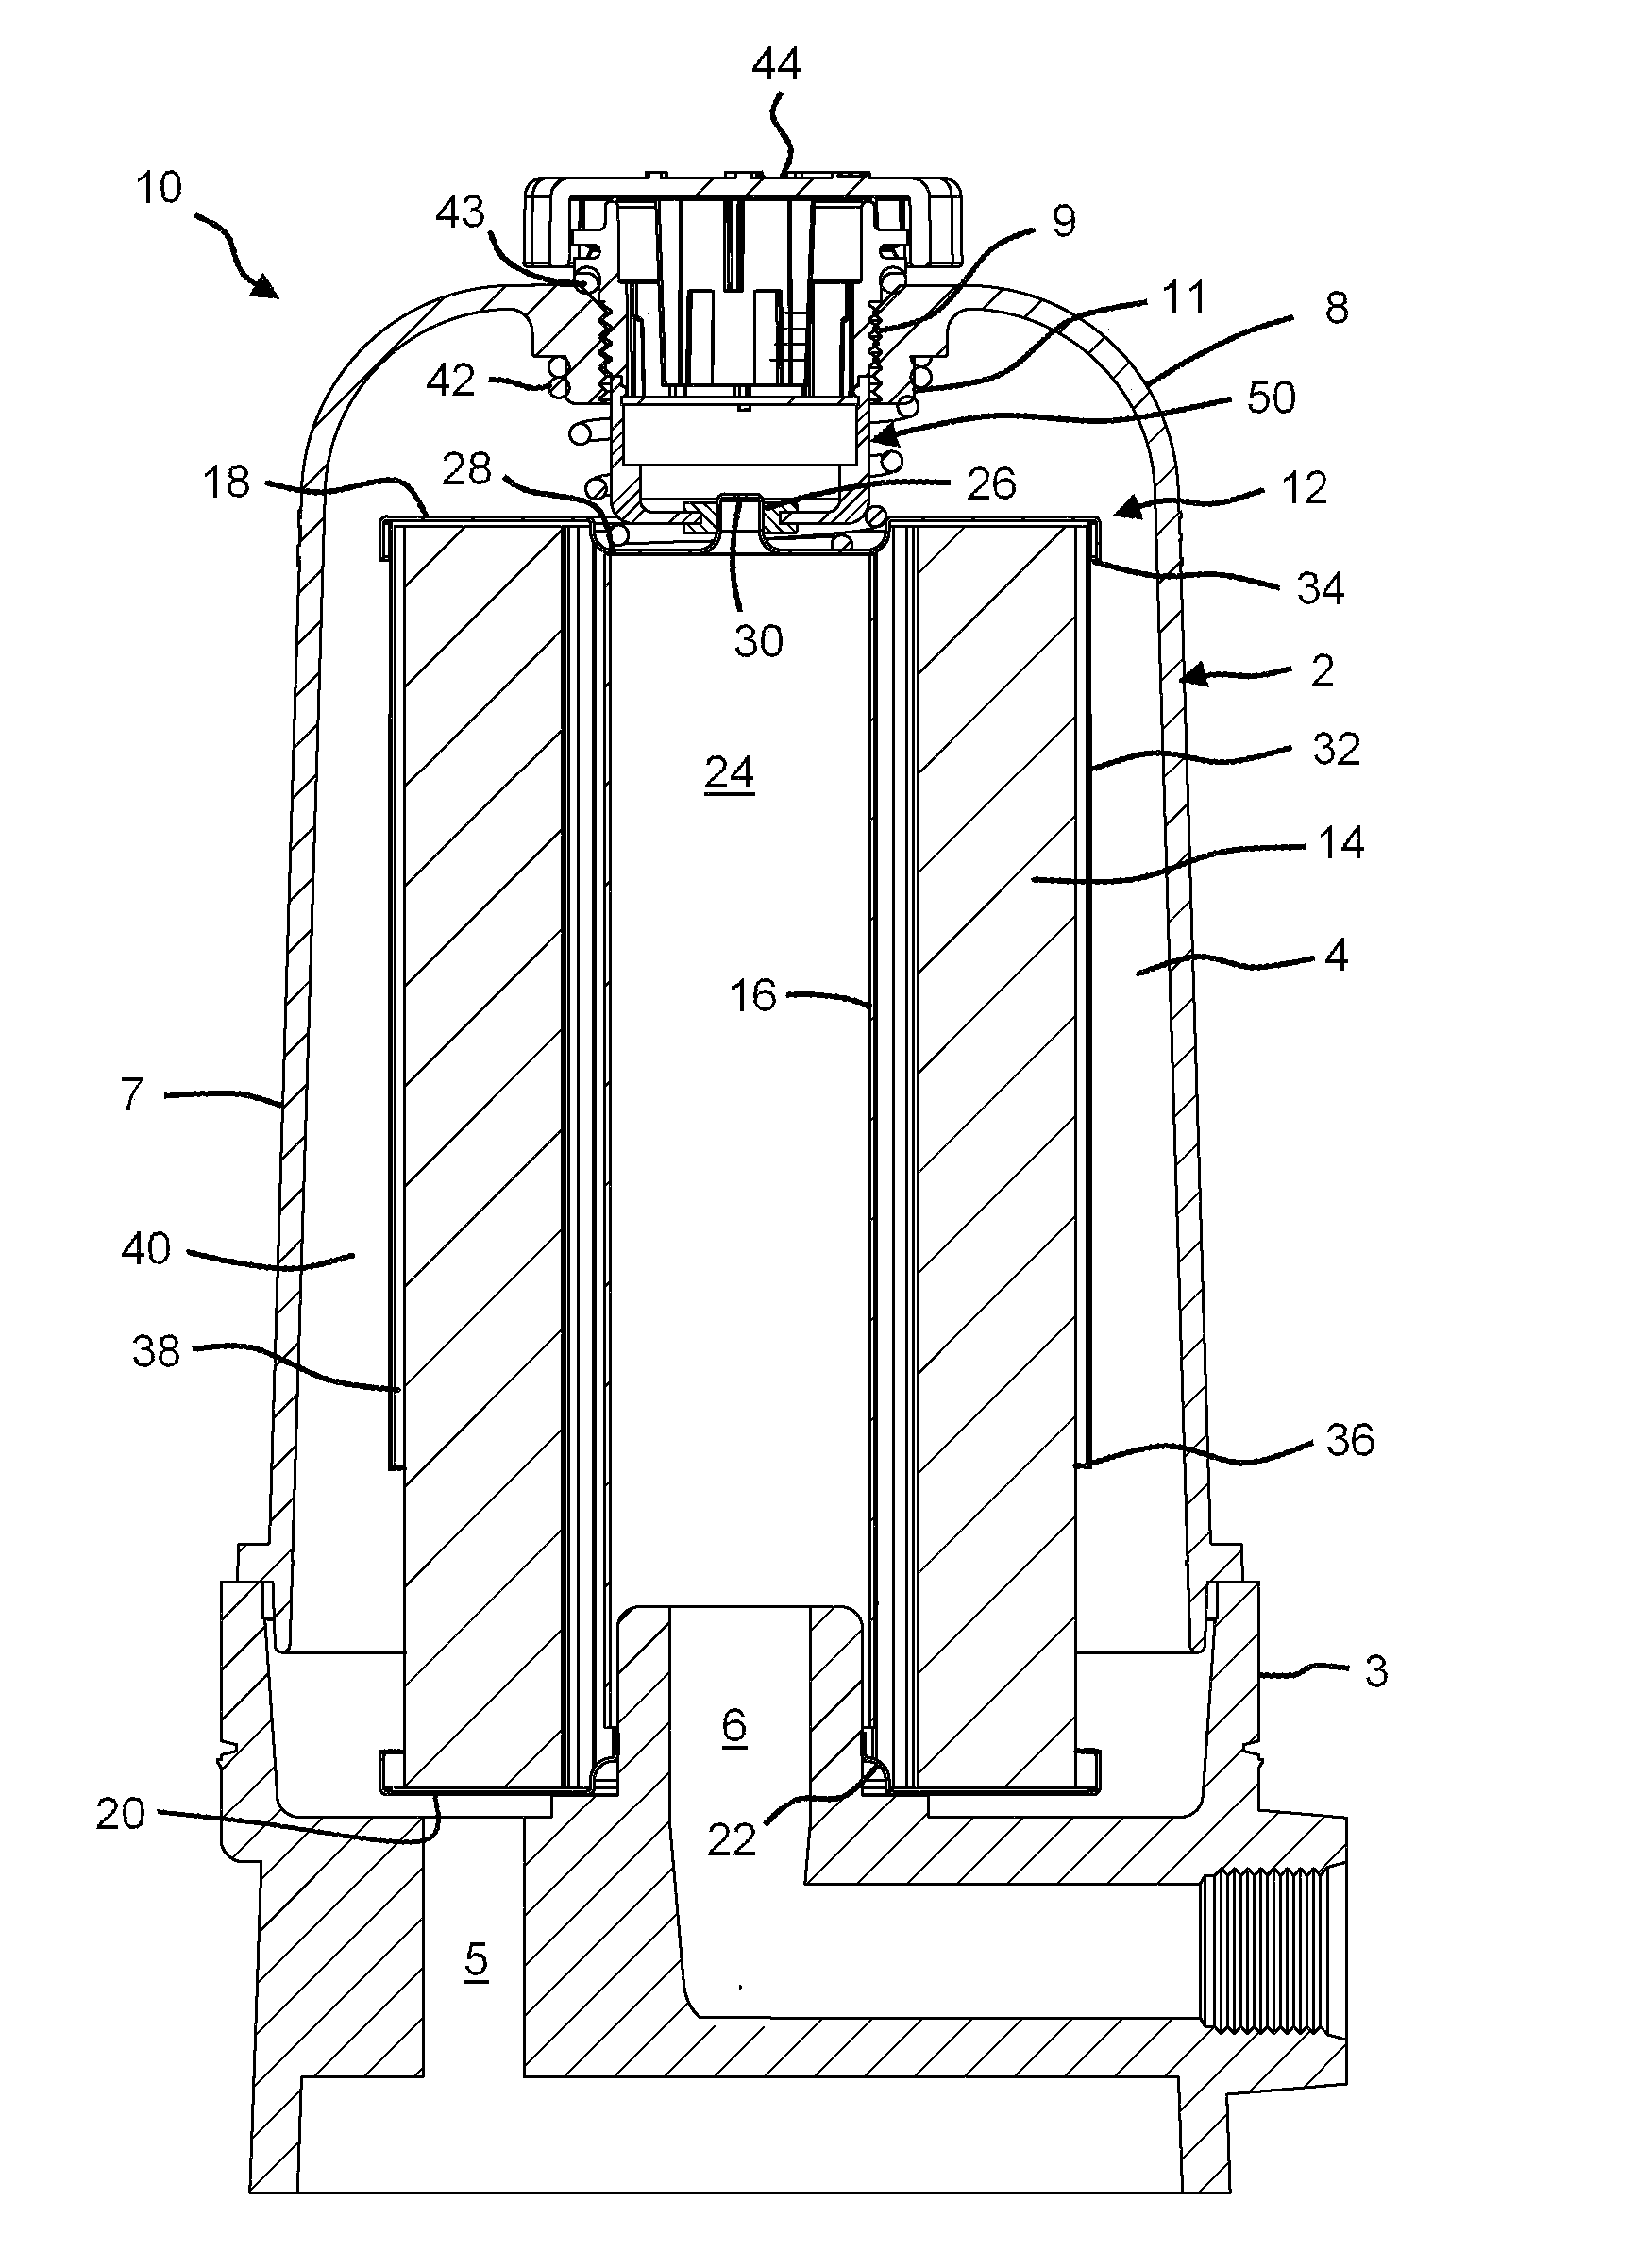 Filter Assembly with Modular Relief Valve Interface